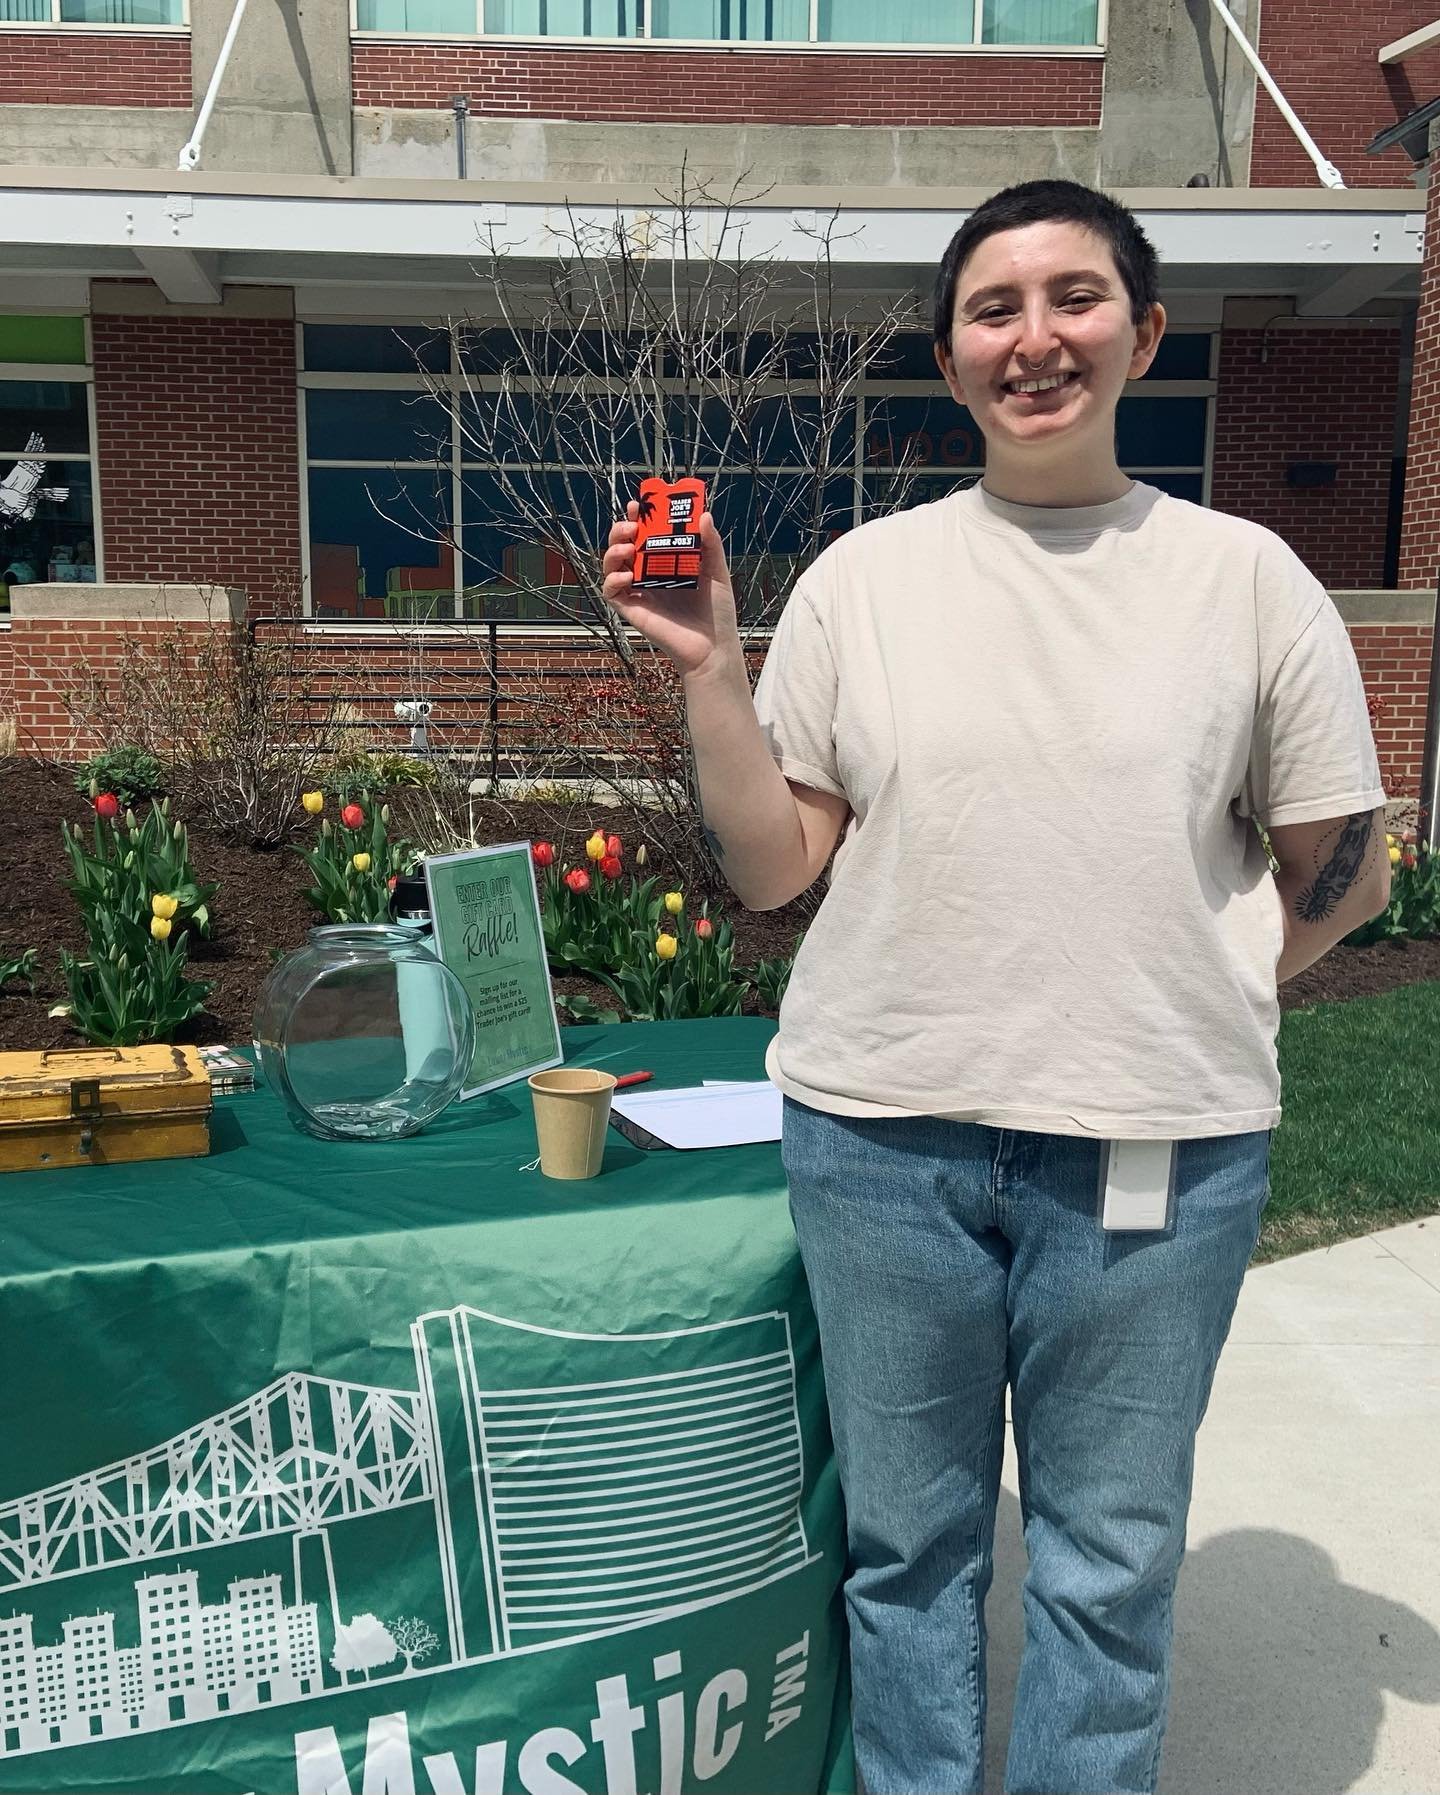 💚🌱 Happy Earth Day! 🌱💚

Here are some pics of us at Hood Park last week to promote the use of sustainable transportation. Congrats to our lucky raffle winner, Rosemary, who won a gift card to Trader Joe&rsquo;s!

💡 Each time you choose to walk, 